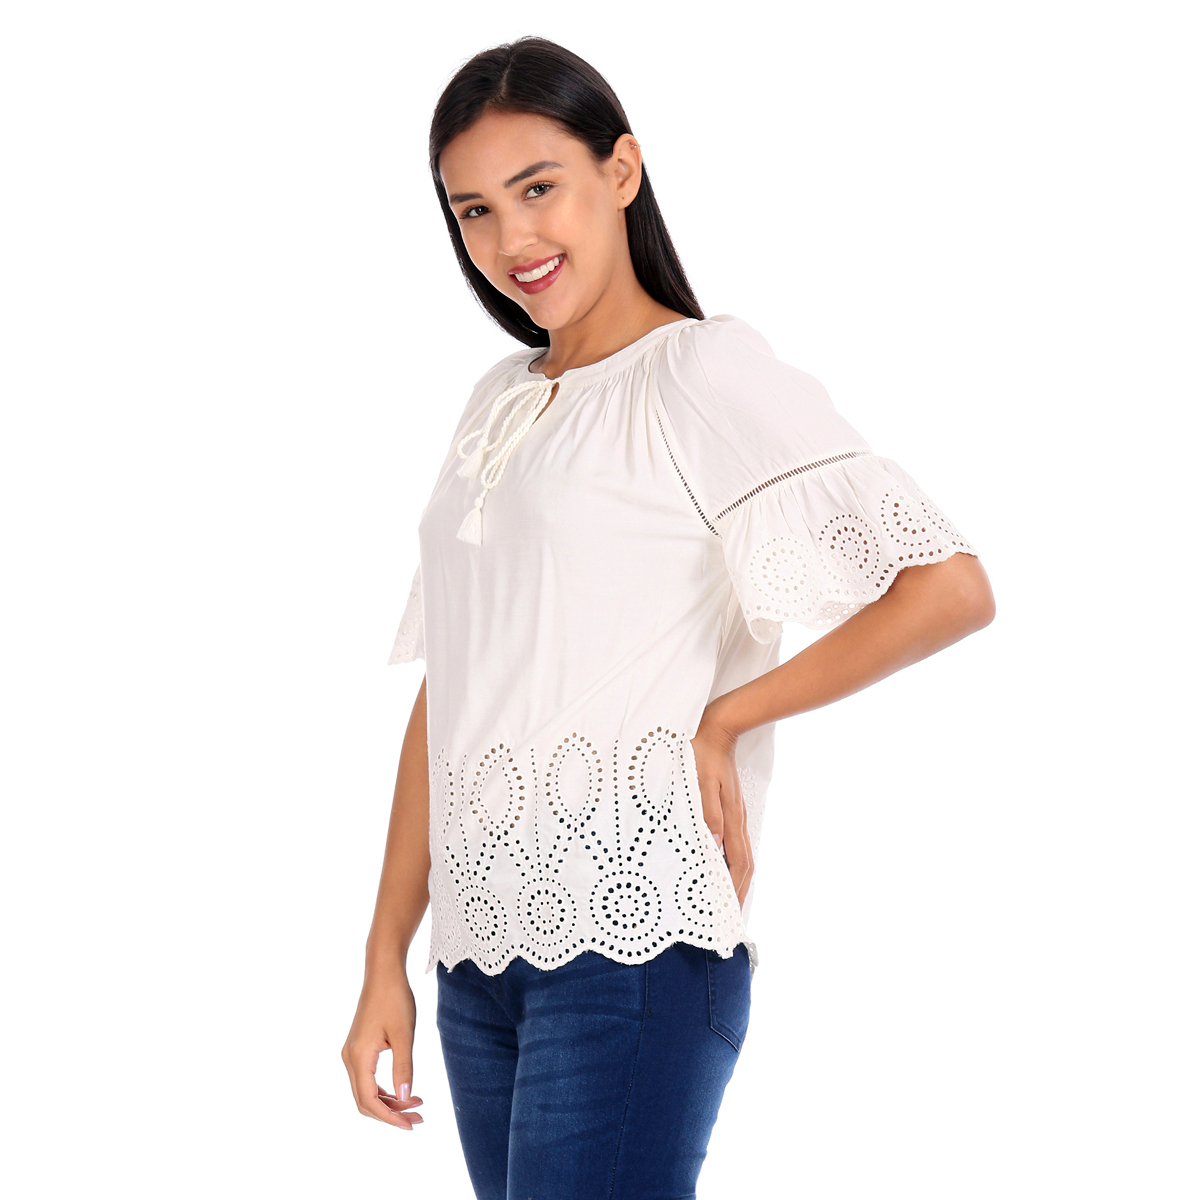 Gap Solid Color Gather Detailed Top Styled by Neck Tie-Up & Scalloped Hem Lines with Embroidered Eyelets - Off White